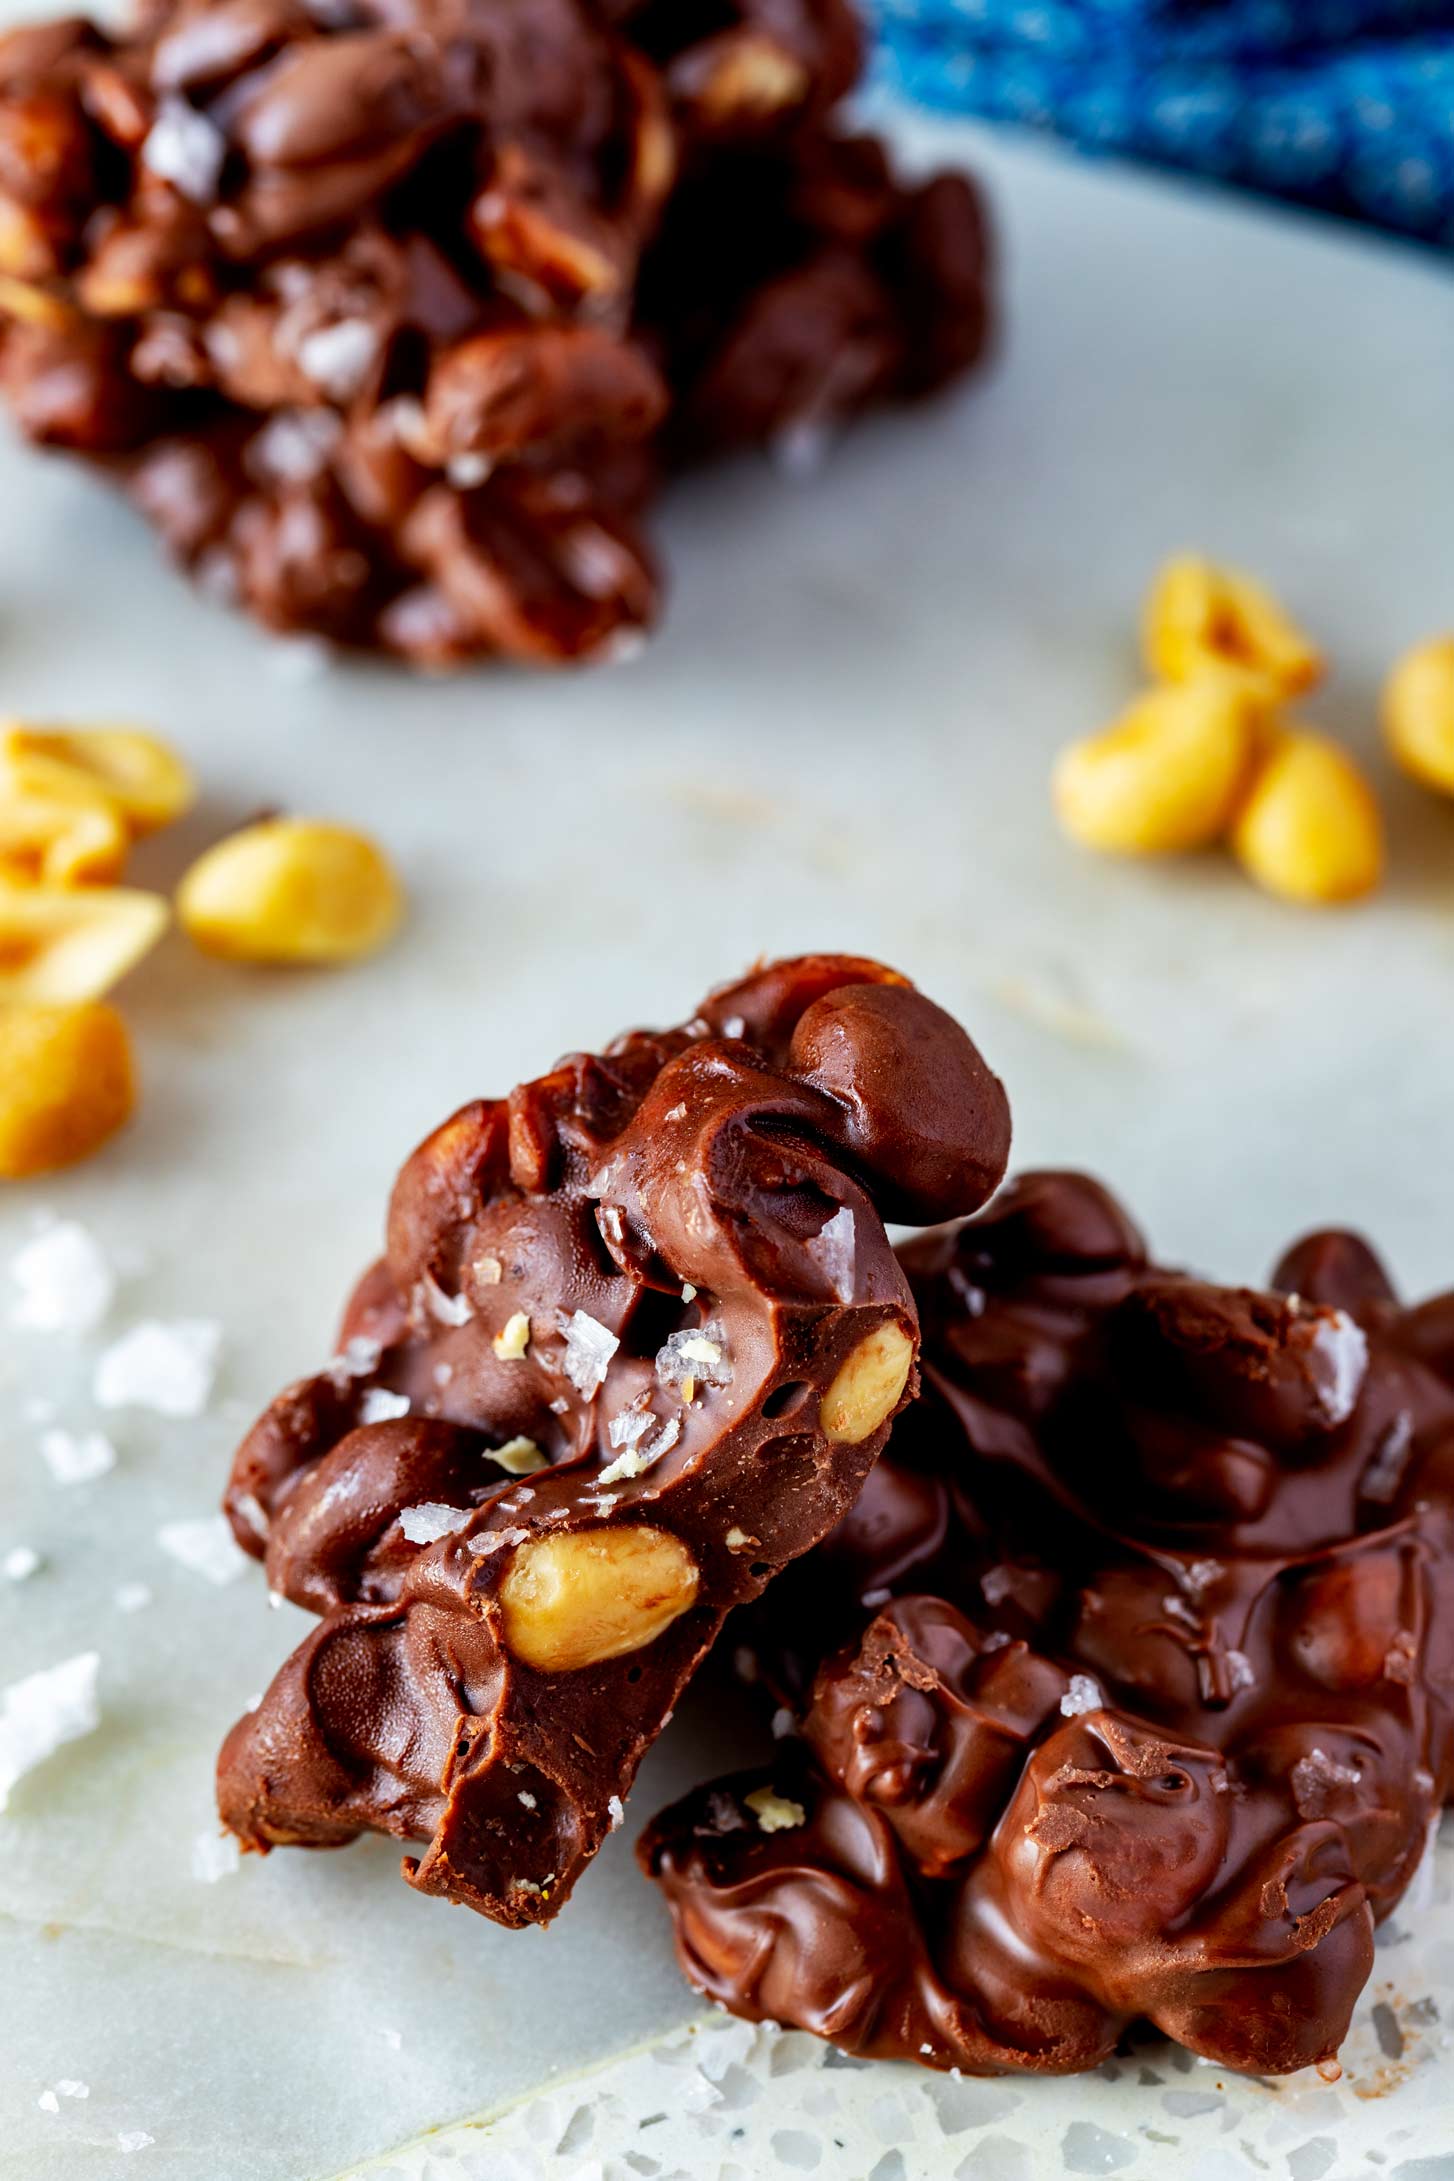 Close up photo of a chocolate peanut cluster with a bite out of it propped on another crockpot peanut cluster.